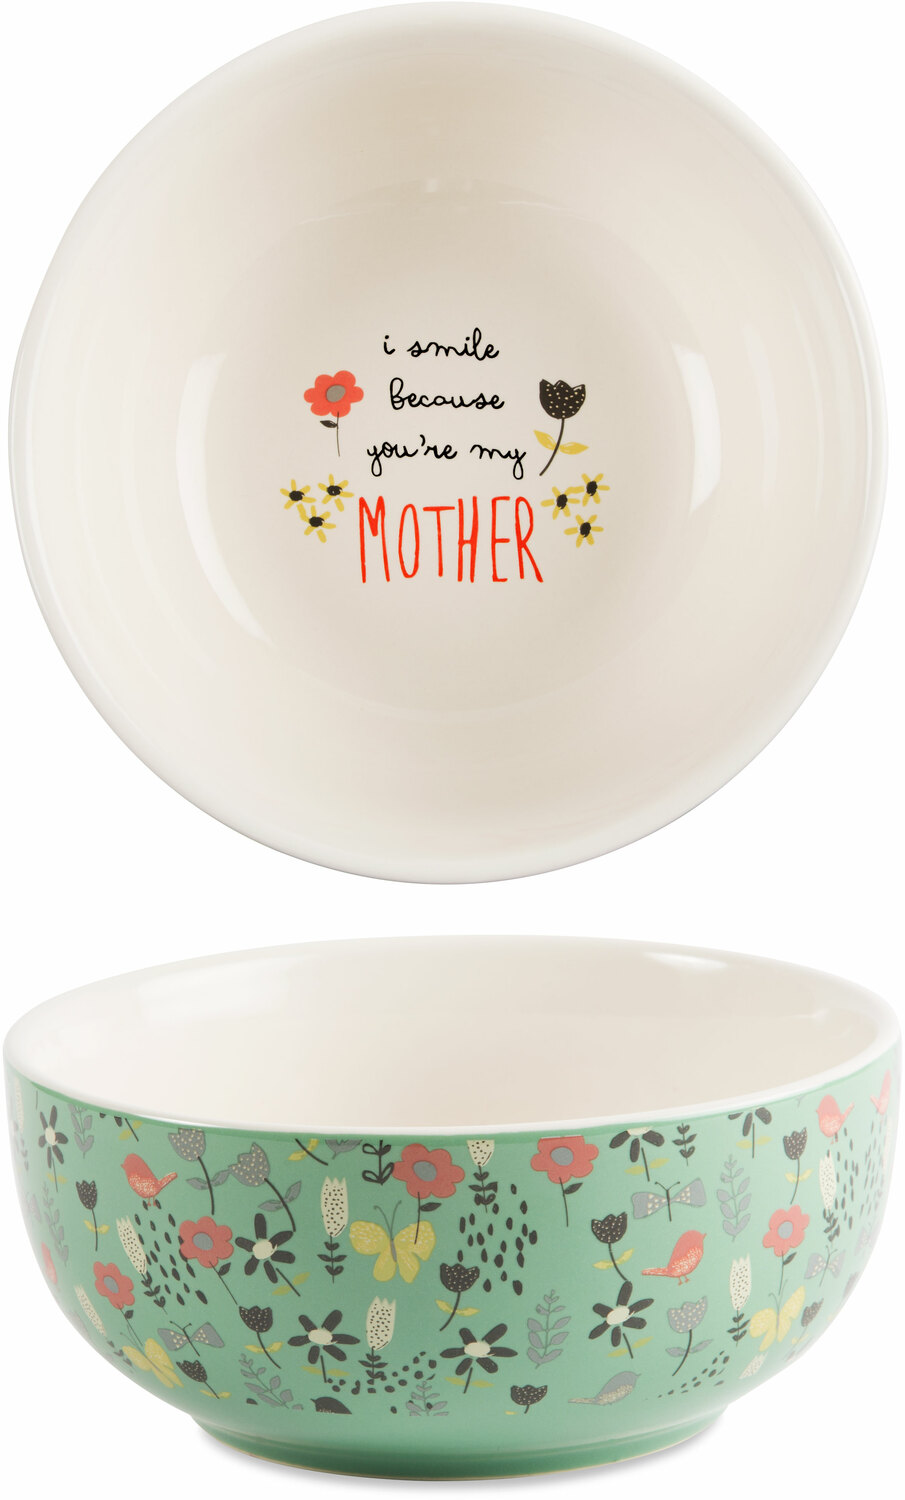 Mother by Bloom by Amylee Weeks - Mother - 2.75"x 6" Ceramic Bowl